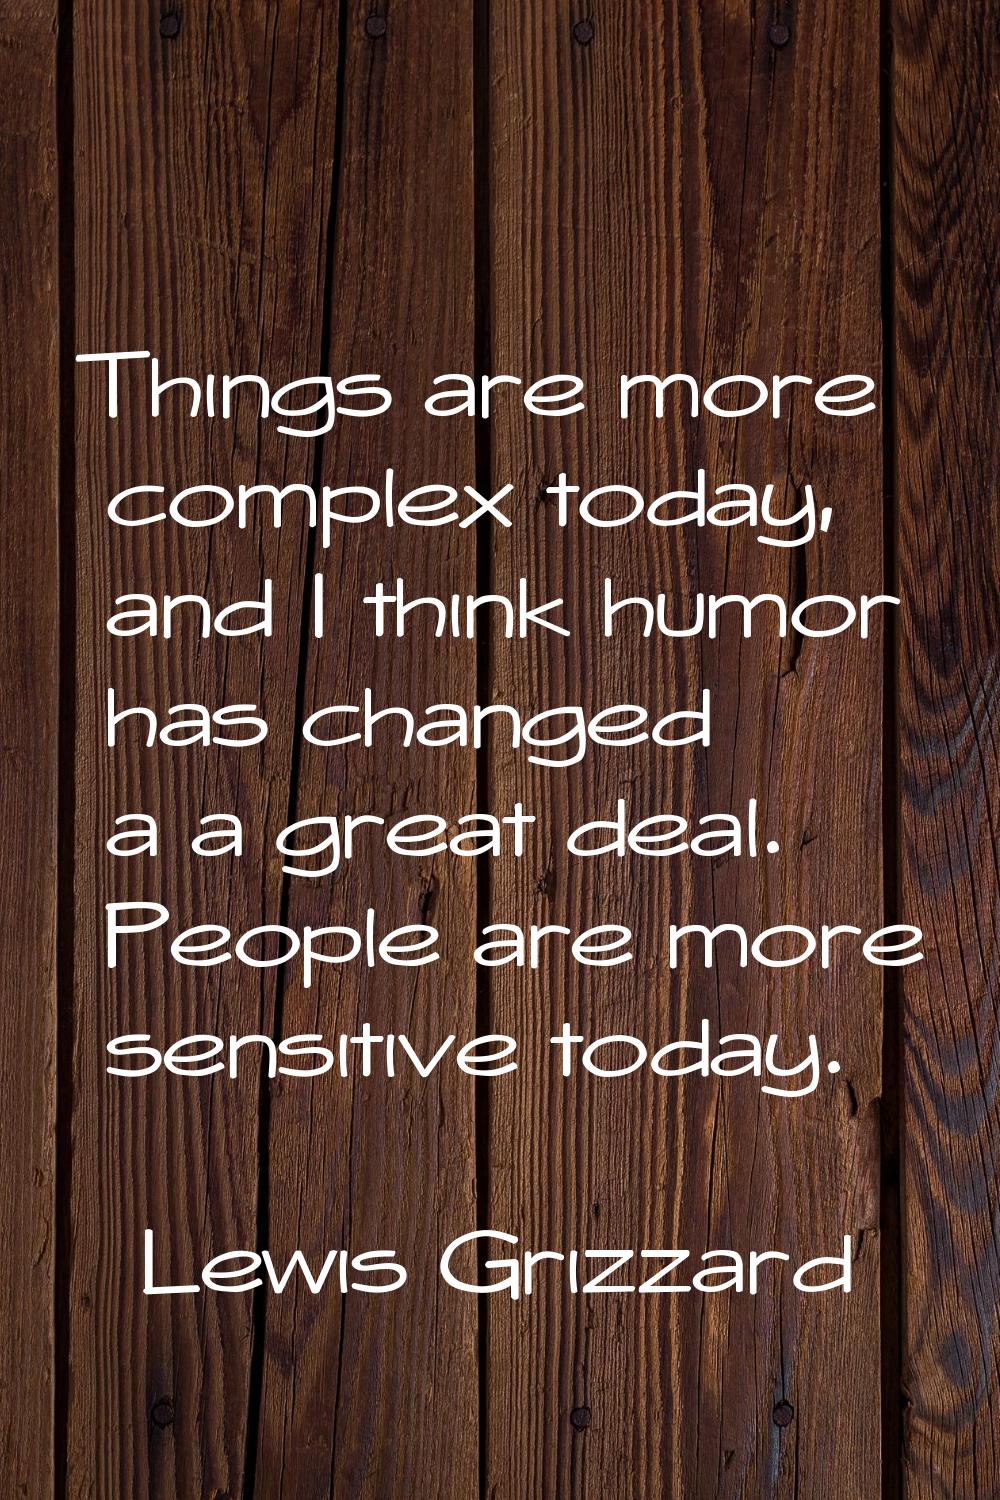 Things are more complex today, and I think humor has changed a a great deal. People are more sensit